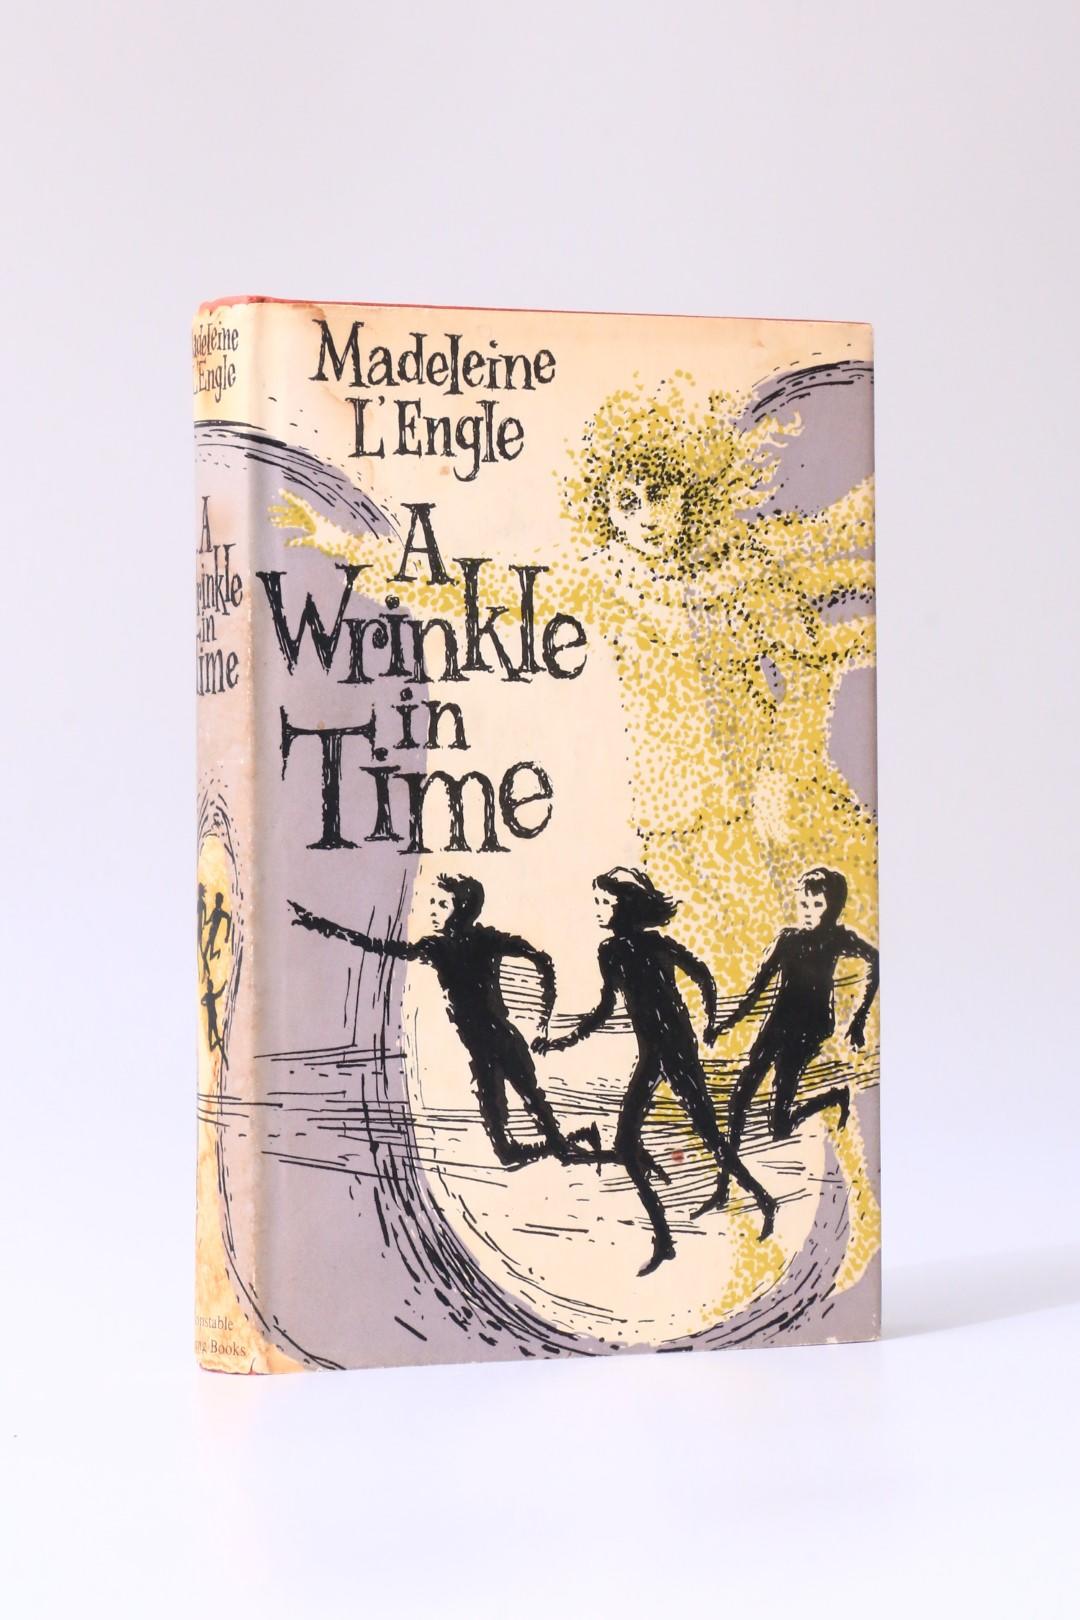 Madeleine L'Engle - A Wrinkle in Time - Constable Young Books, 1963, First Edition.